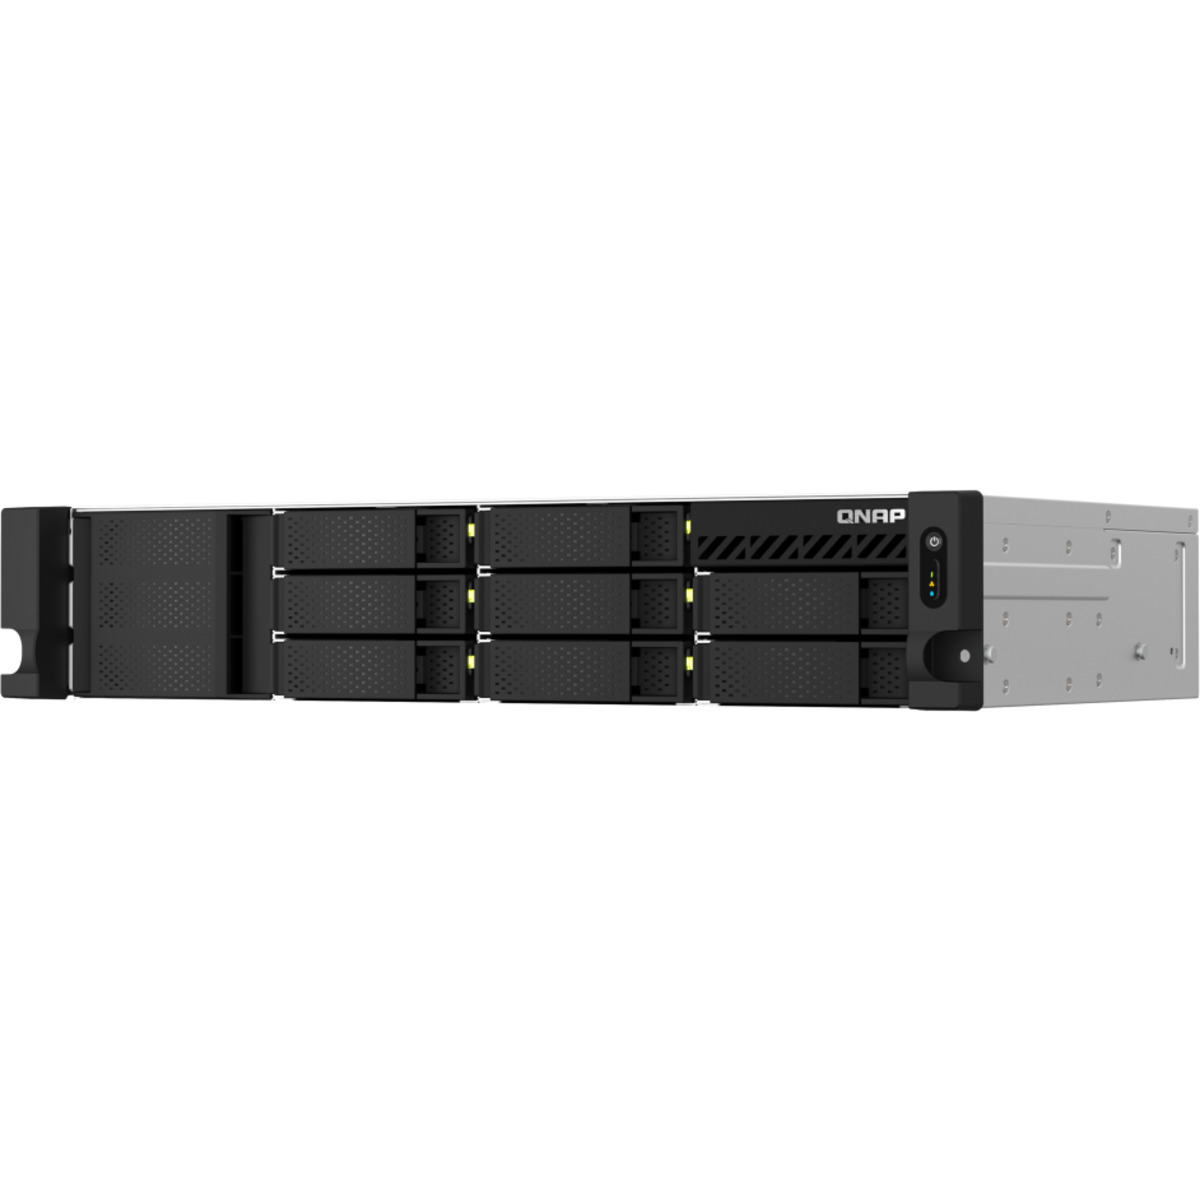 buy QNAP TS-864eU-RP 128tb RackMount NAS - Network Attached Storage Device 8x16000gb Seagate EXOS X18 ST16000NM000J 3.5 7200rpm SATA 6Gb/s HDD ENTERPRISE Class Drives Installed - Burn-In Tested - nas headquarters buy network attached storage server device das new raid-5 free shipping simply usa TS-864eU-RP